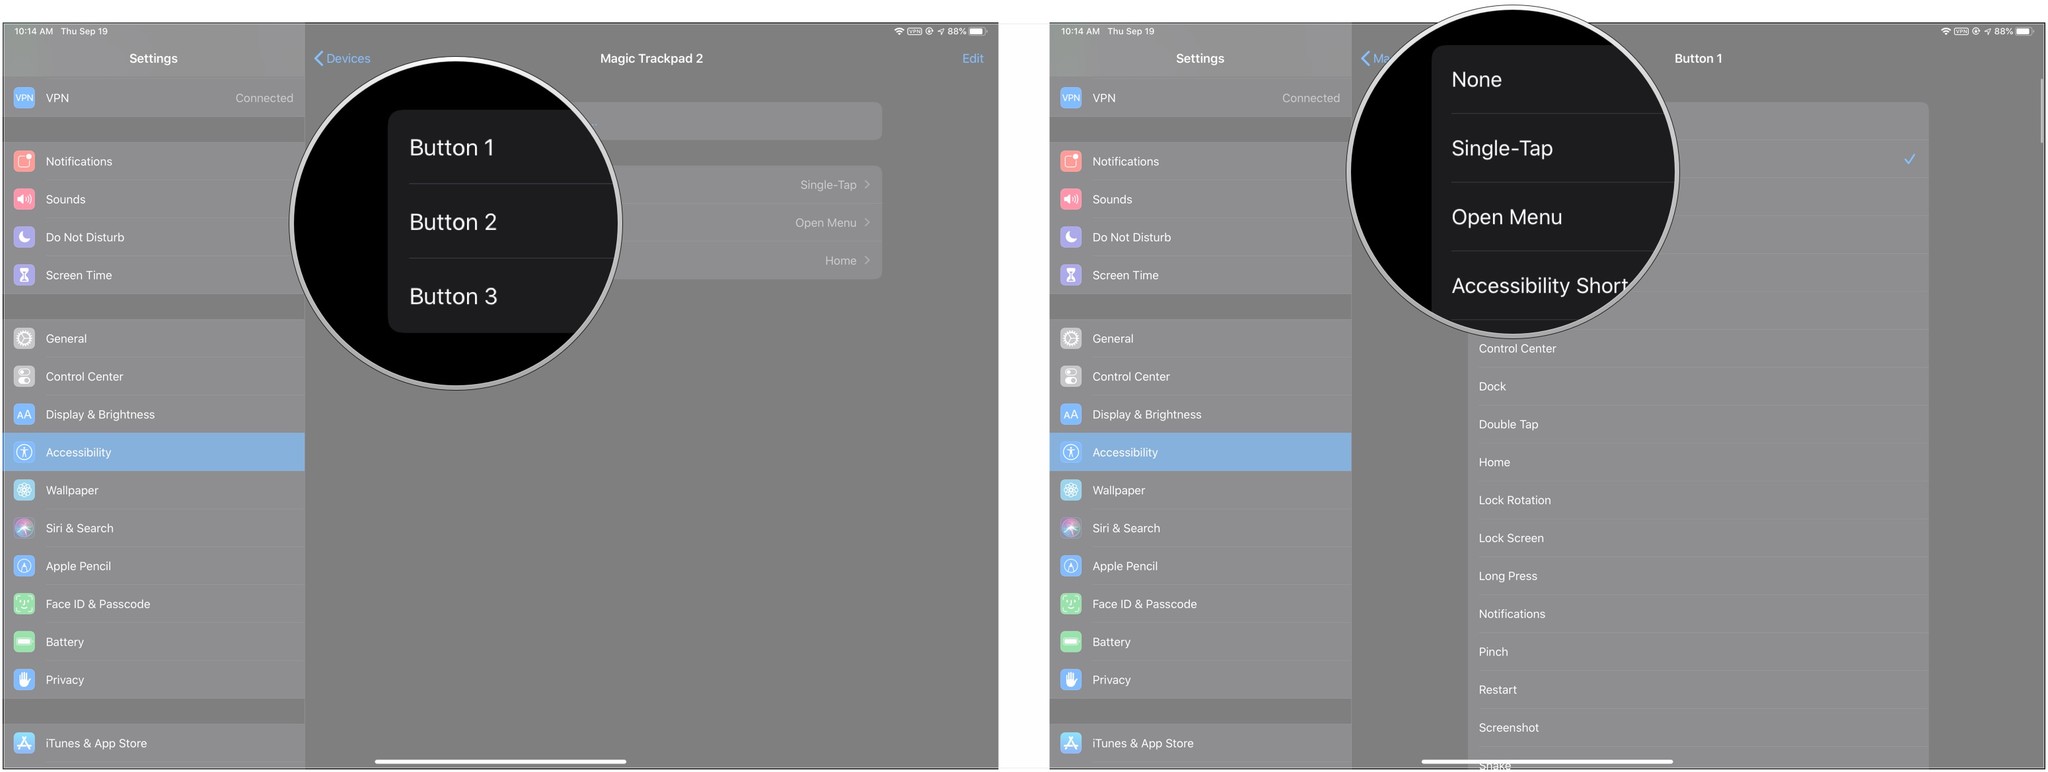 Customize buttons on pointing device on iPad: Tap button labels, tap action